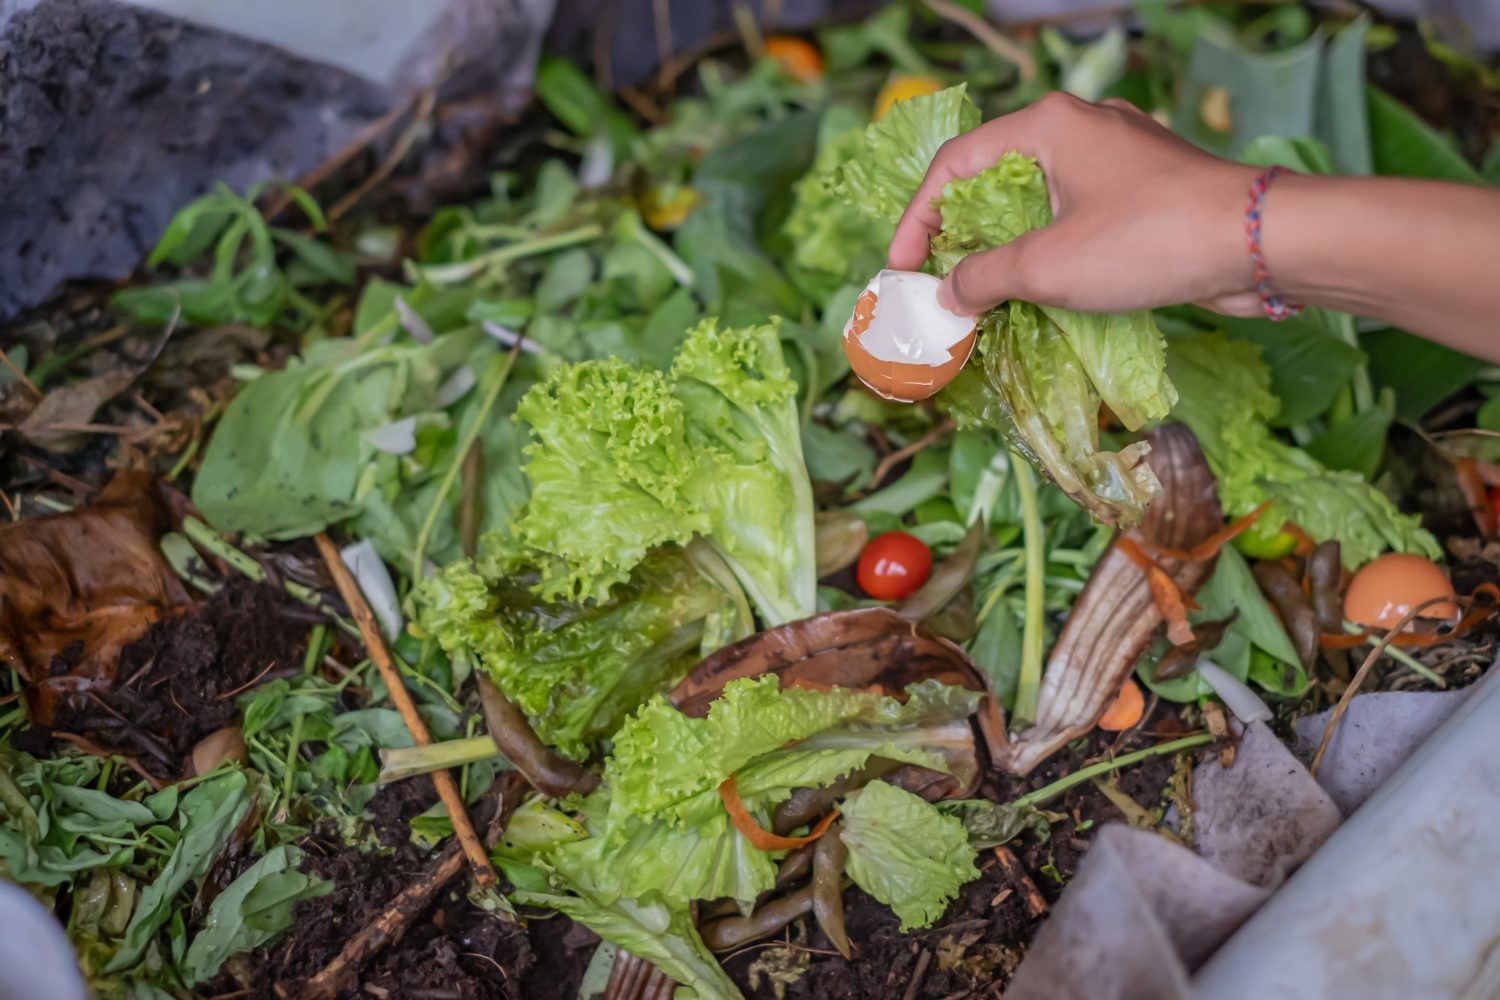 Close-up shot of a female hand-throwing organic biodegradable food kitchen waste into a compost pile at permaculture farm as a solution for household waste management. She's holding a crack open egg and some rotten lettuces. July 2021